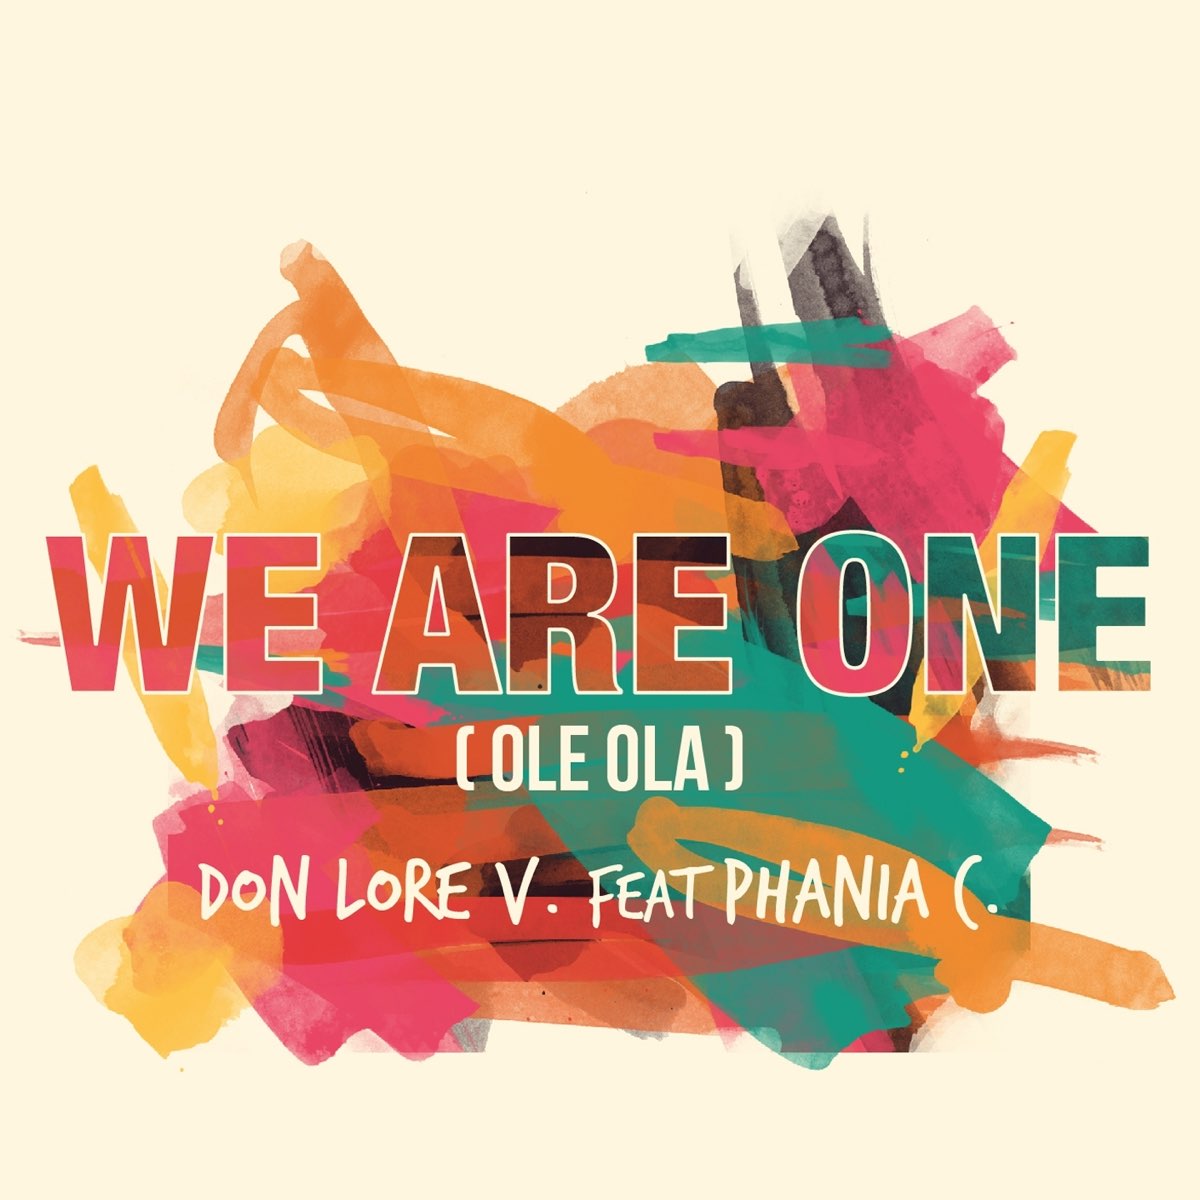 Lore v. We are one. We are one ole Ola. Don Lore v. We are one ole Ola текст.